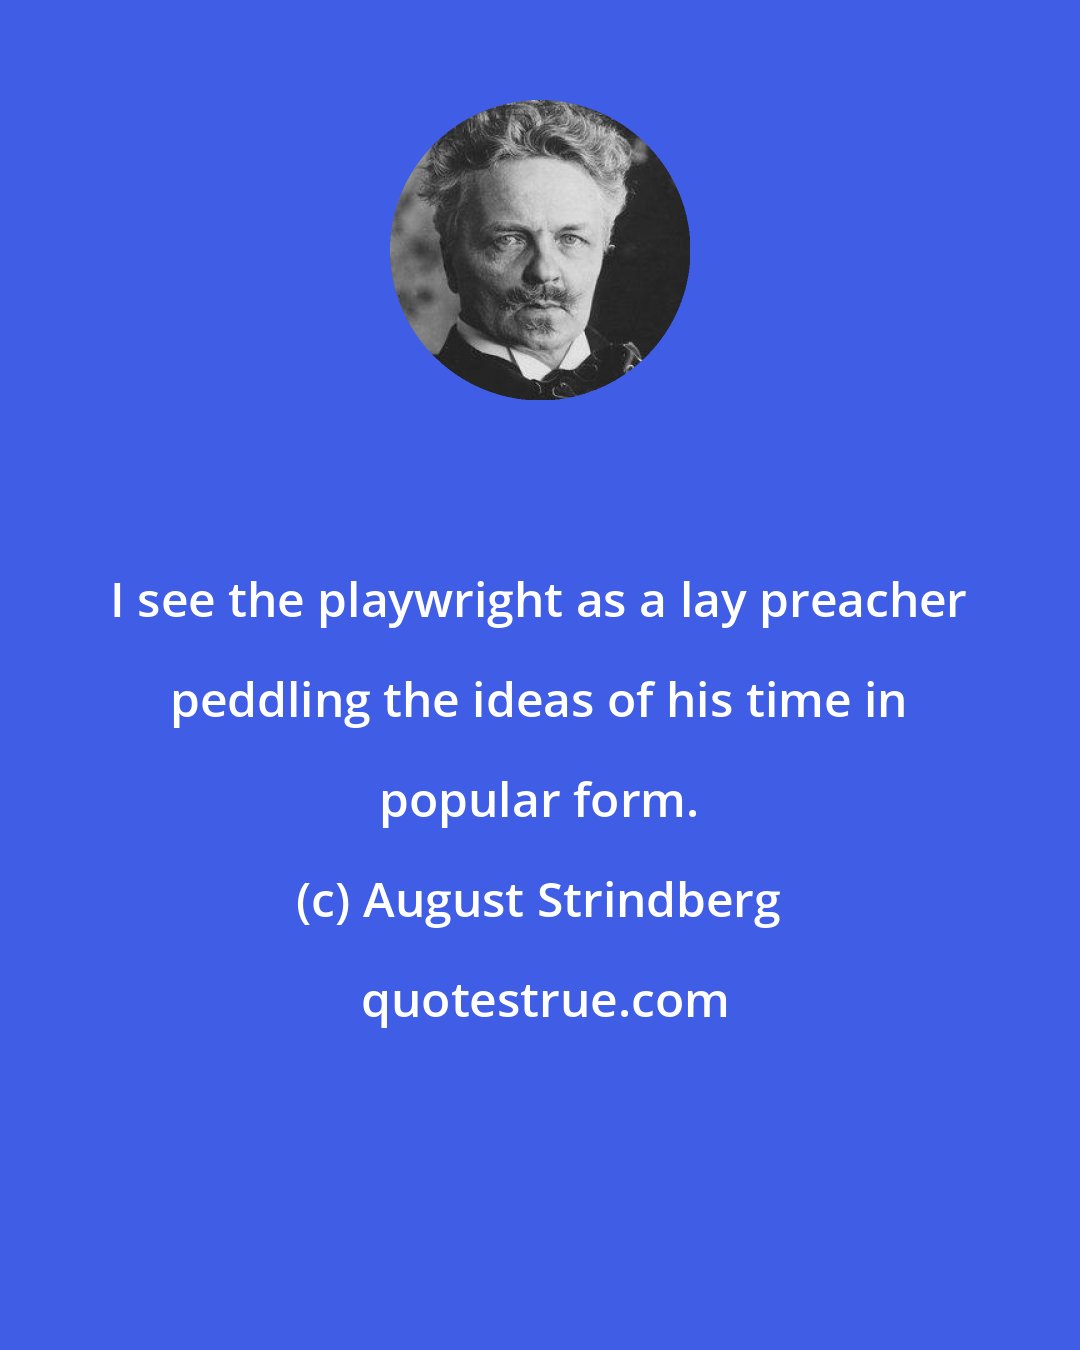 August Strindberg: I see the playwright as a lay preacher peddling the ideas of his time in popular form.